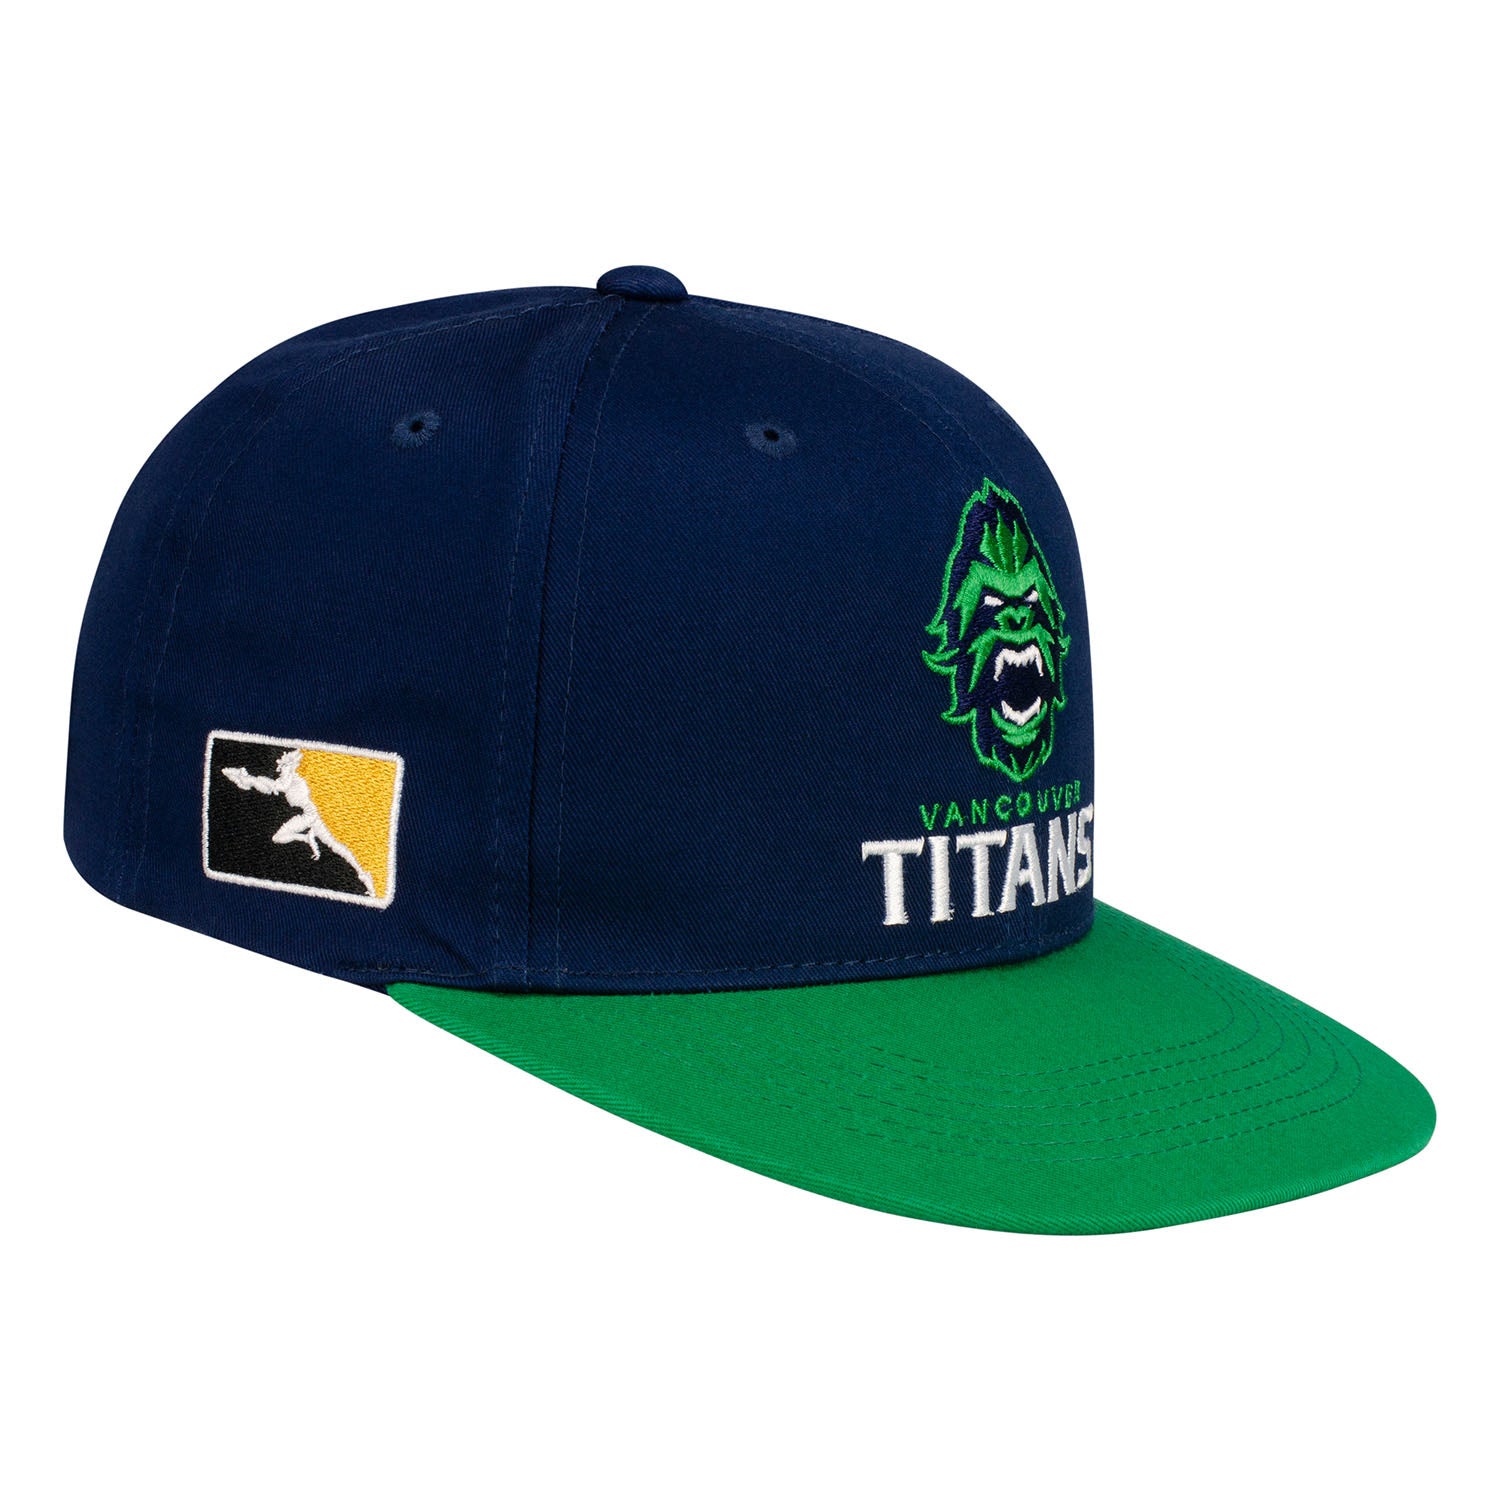 Vancouver Titans Blue Snapback Hat - Right View